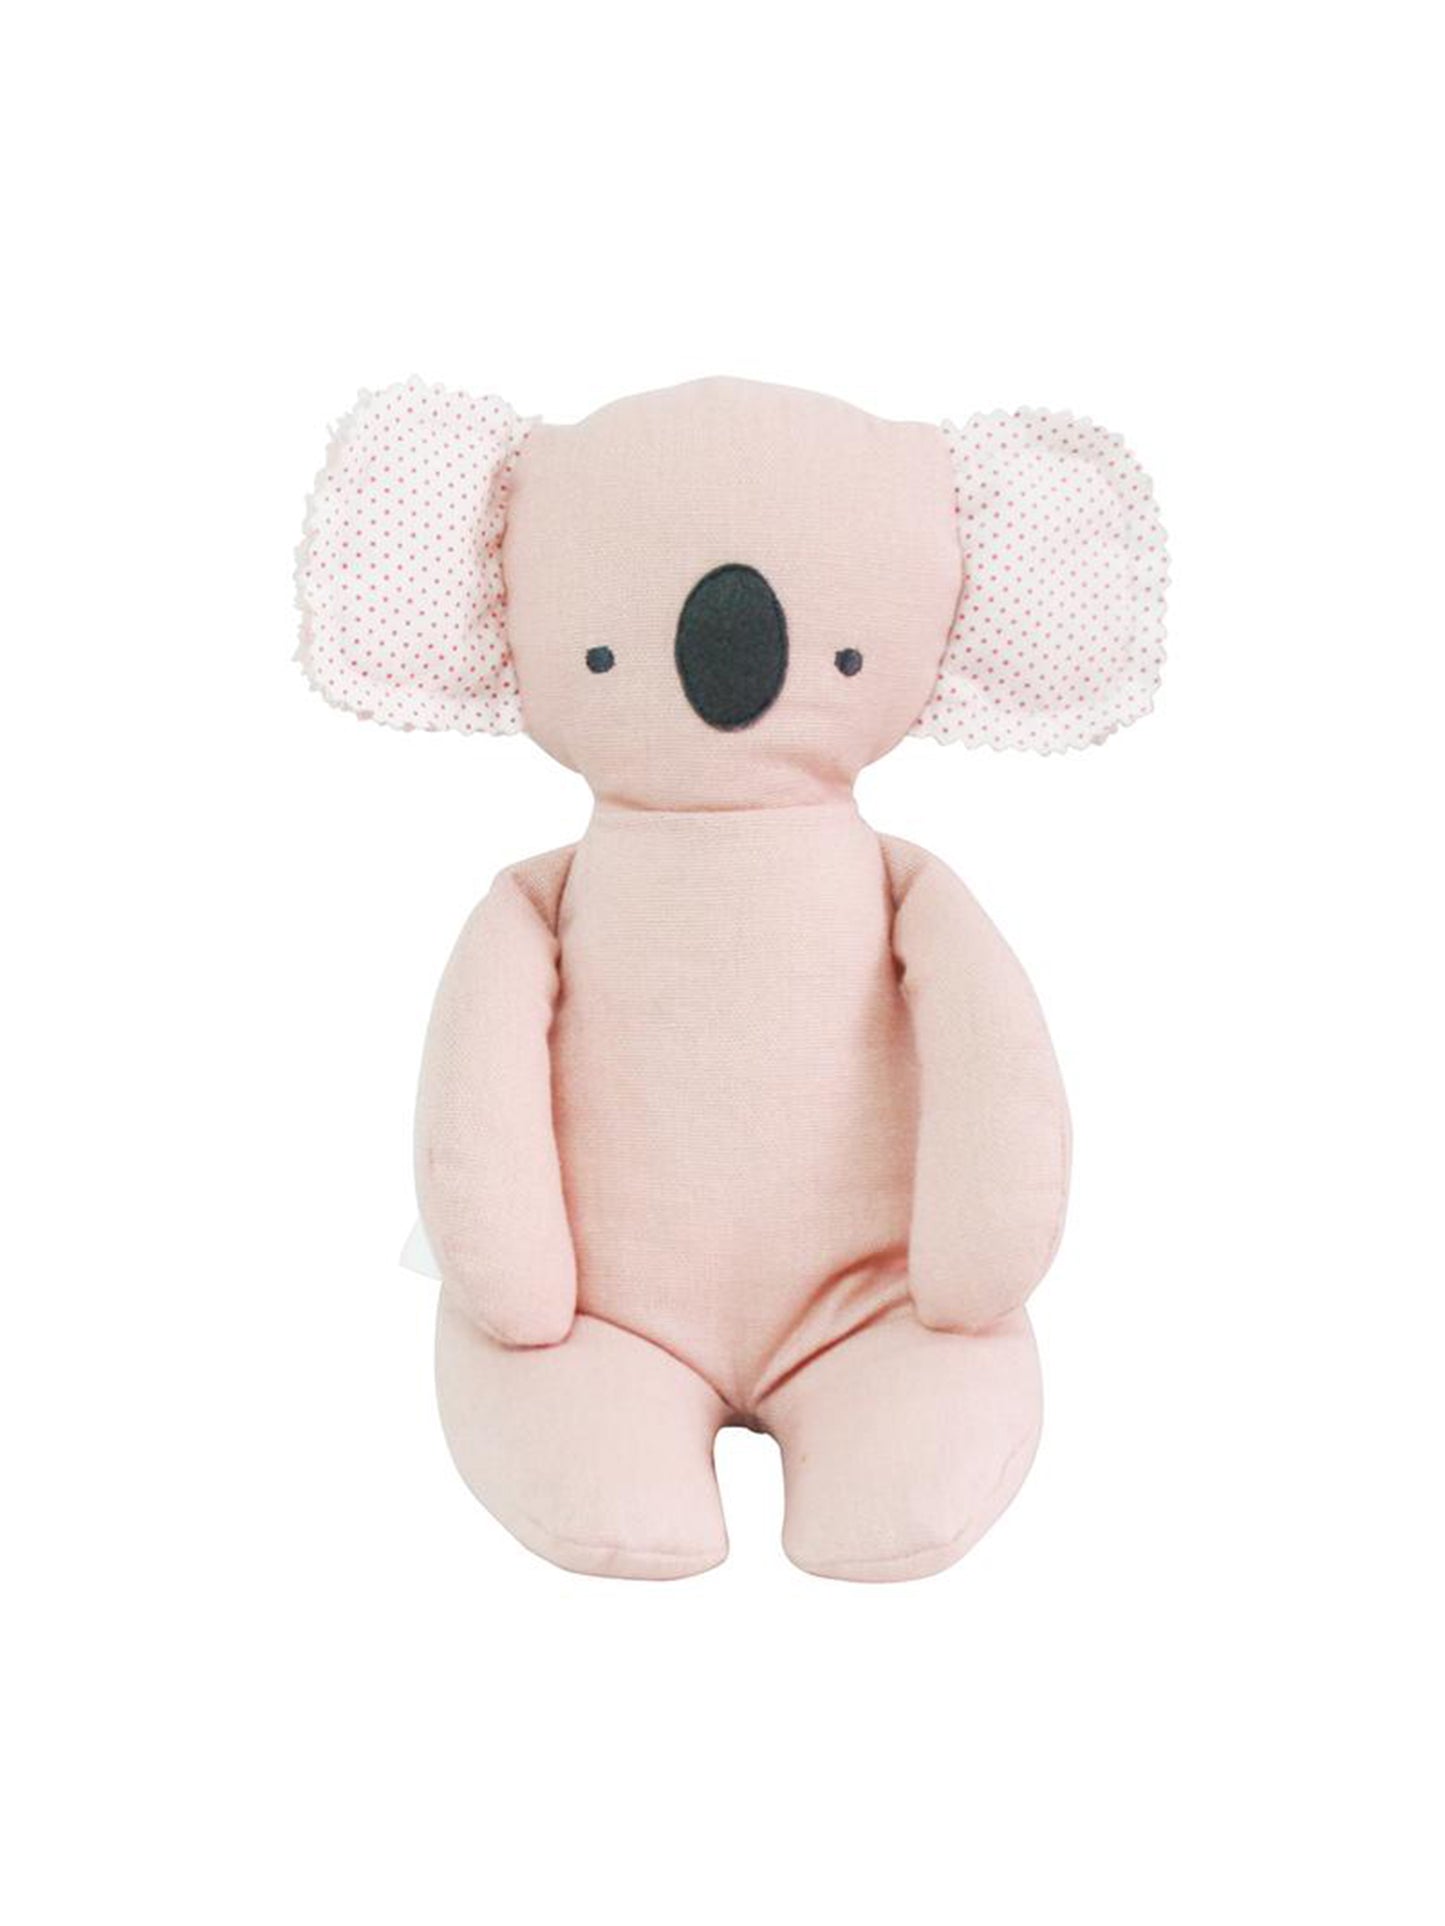 JOSON 13.8 inch Koala Stuffed Animals, Lovely Koala Plush Pillows, Creative Room Decorations for Boys and Girls, Perfect Decompression Gifts (Pink)